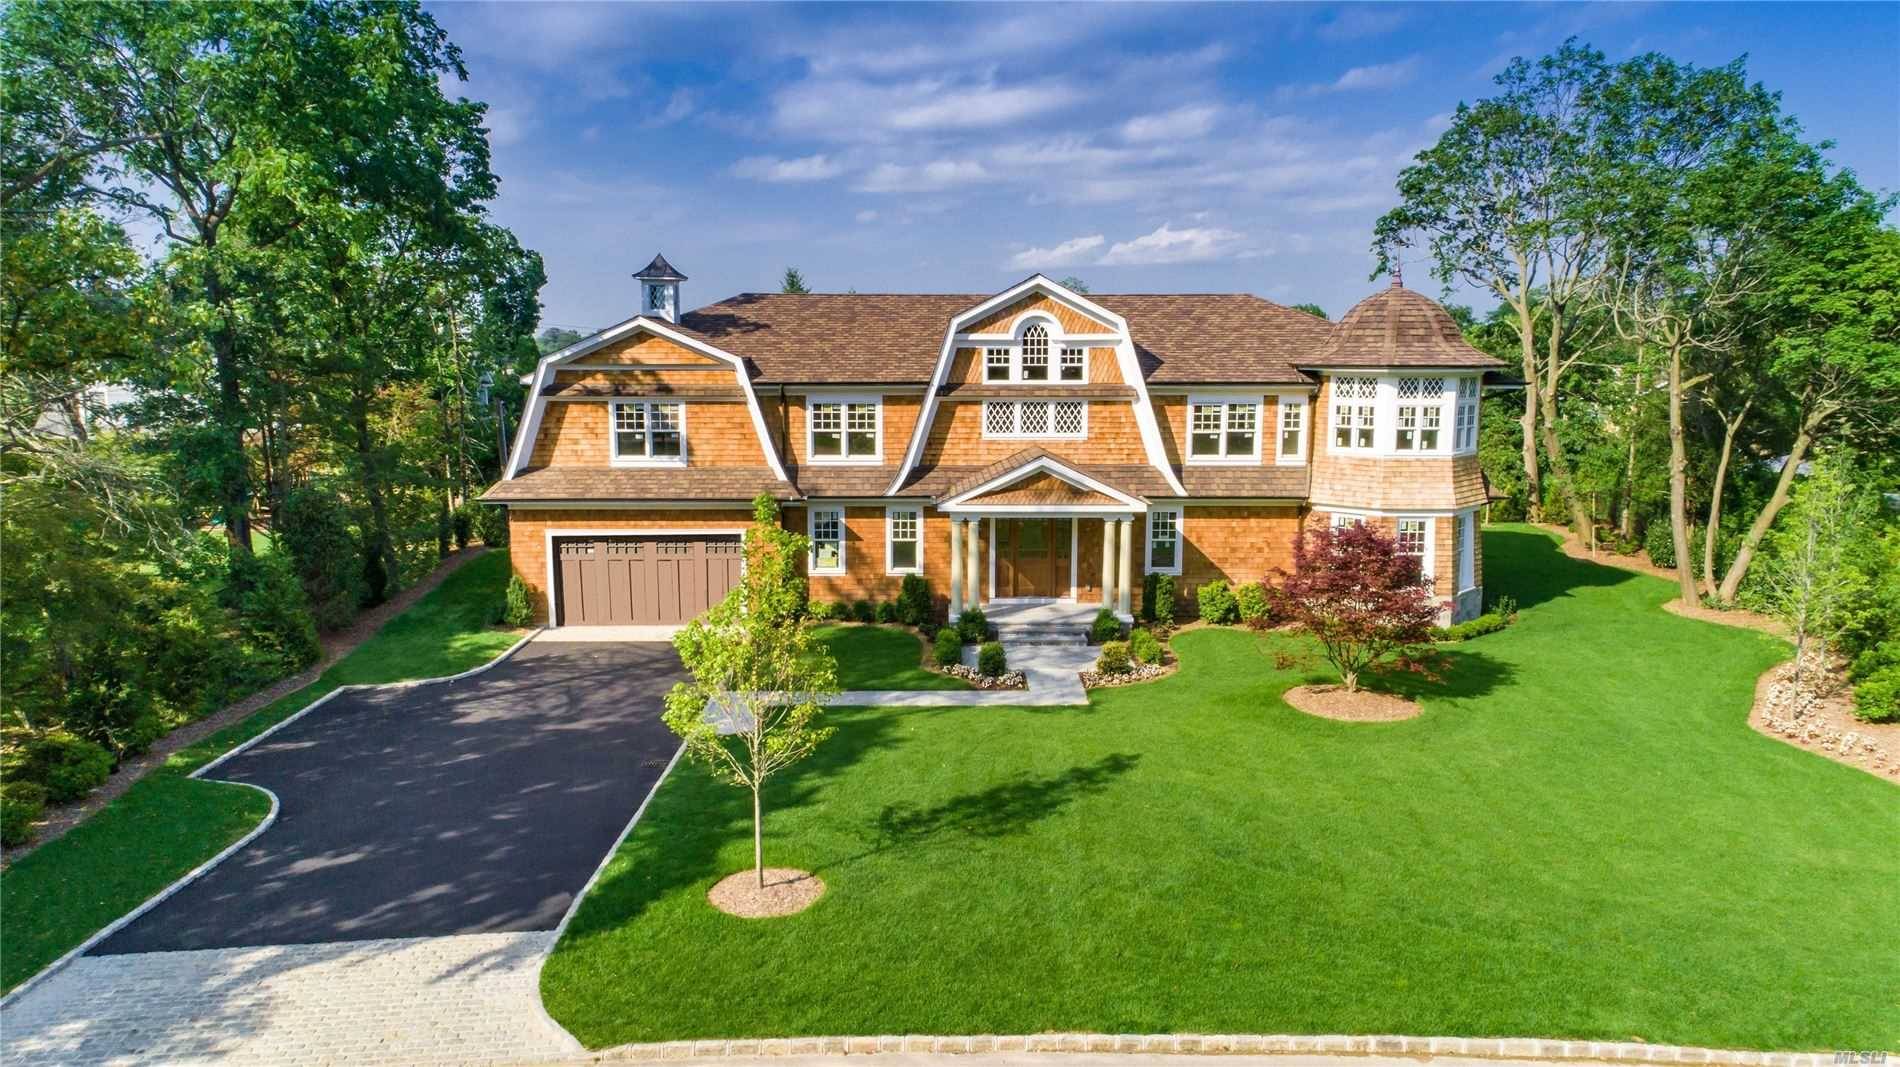 Built By Beer New Construction Serene Hampton Shingle Style Home in Country Estates.